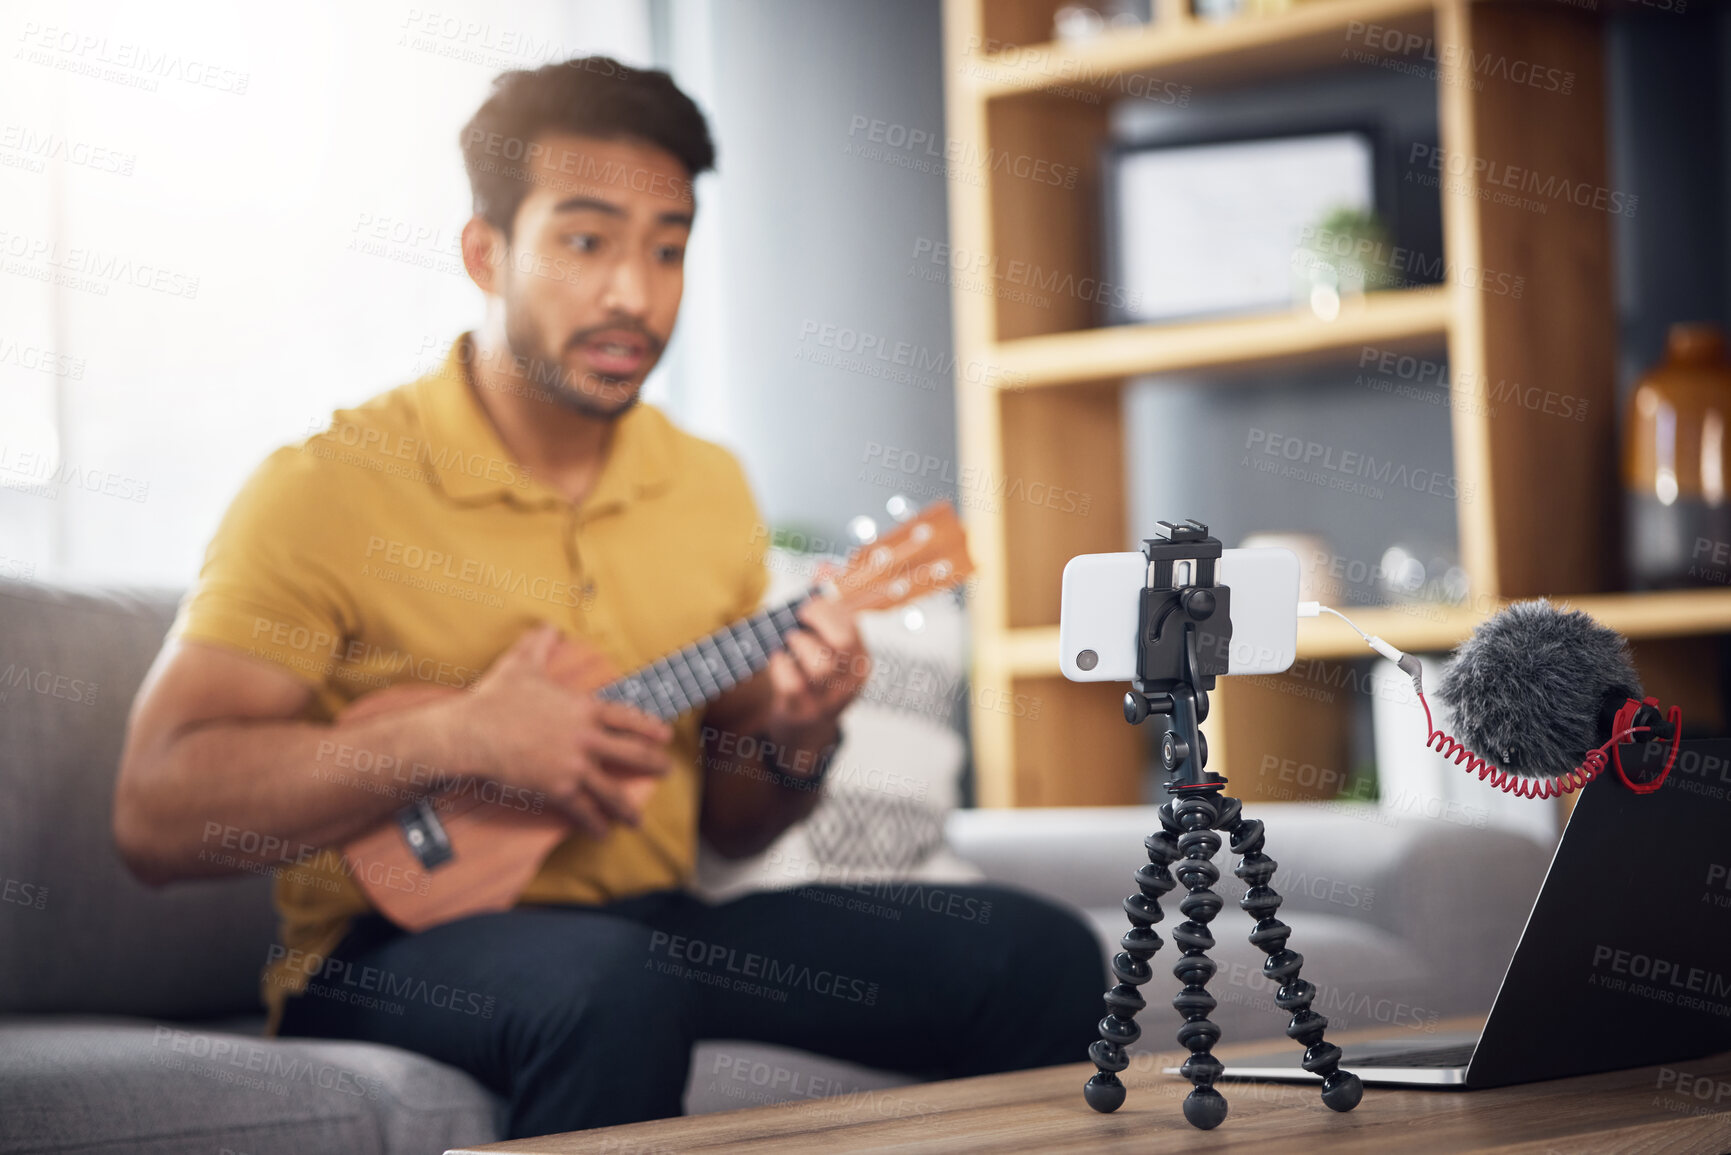 Buy stock photo Podcast microphone, phone and guitar with a man online to coach during live streaming lesson. Asian male influencer on home sofa with a ukulele as content creator teaching music on education blog